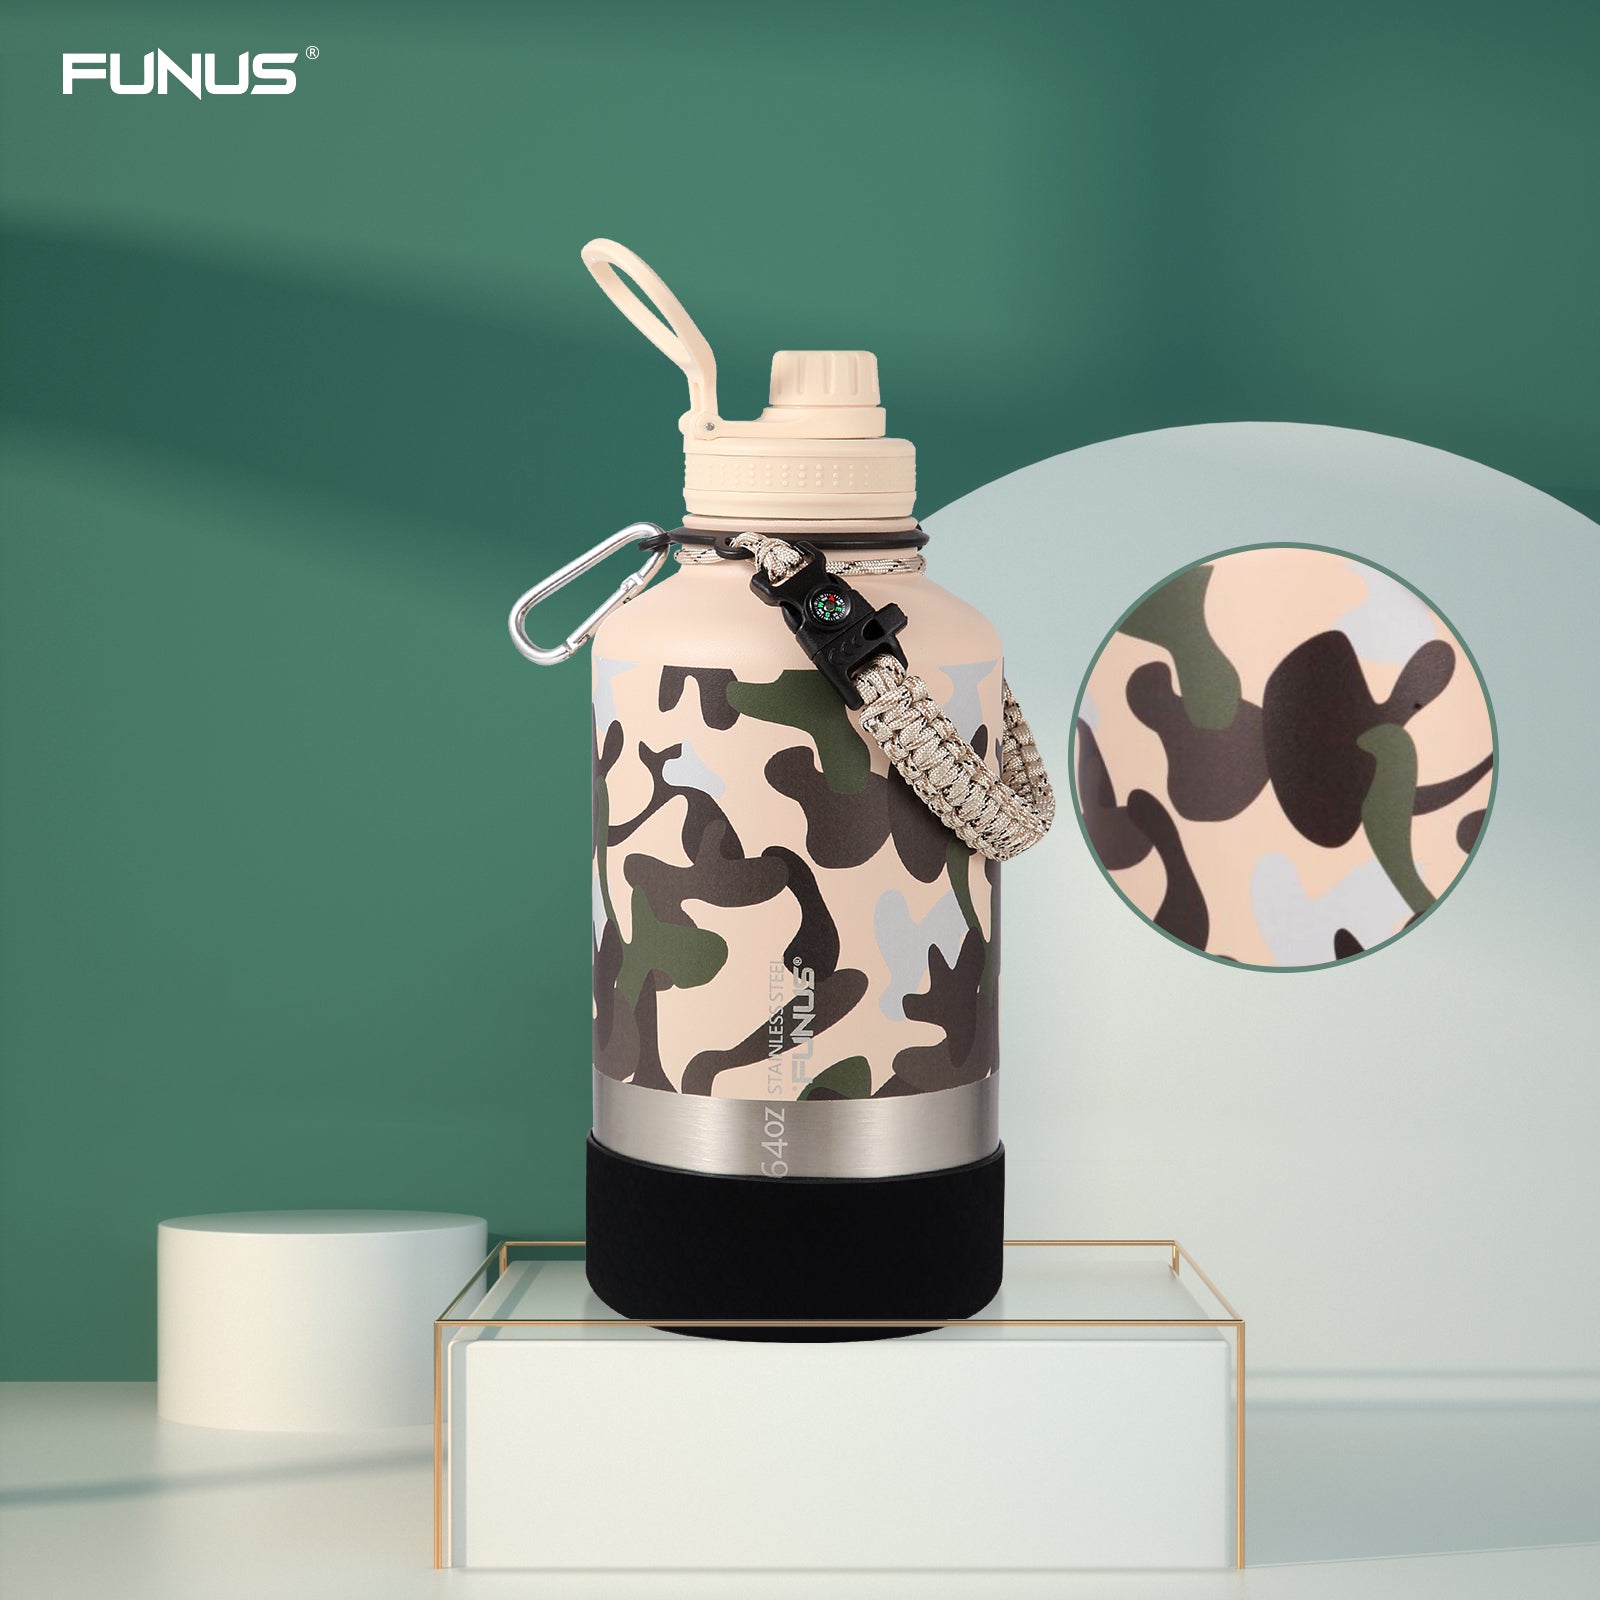 Stainless Steel Thermal Bottle - Camo